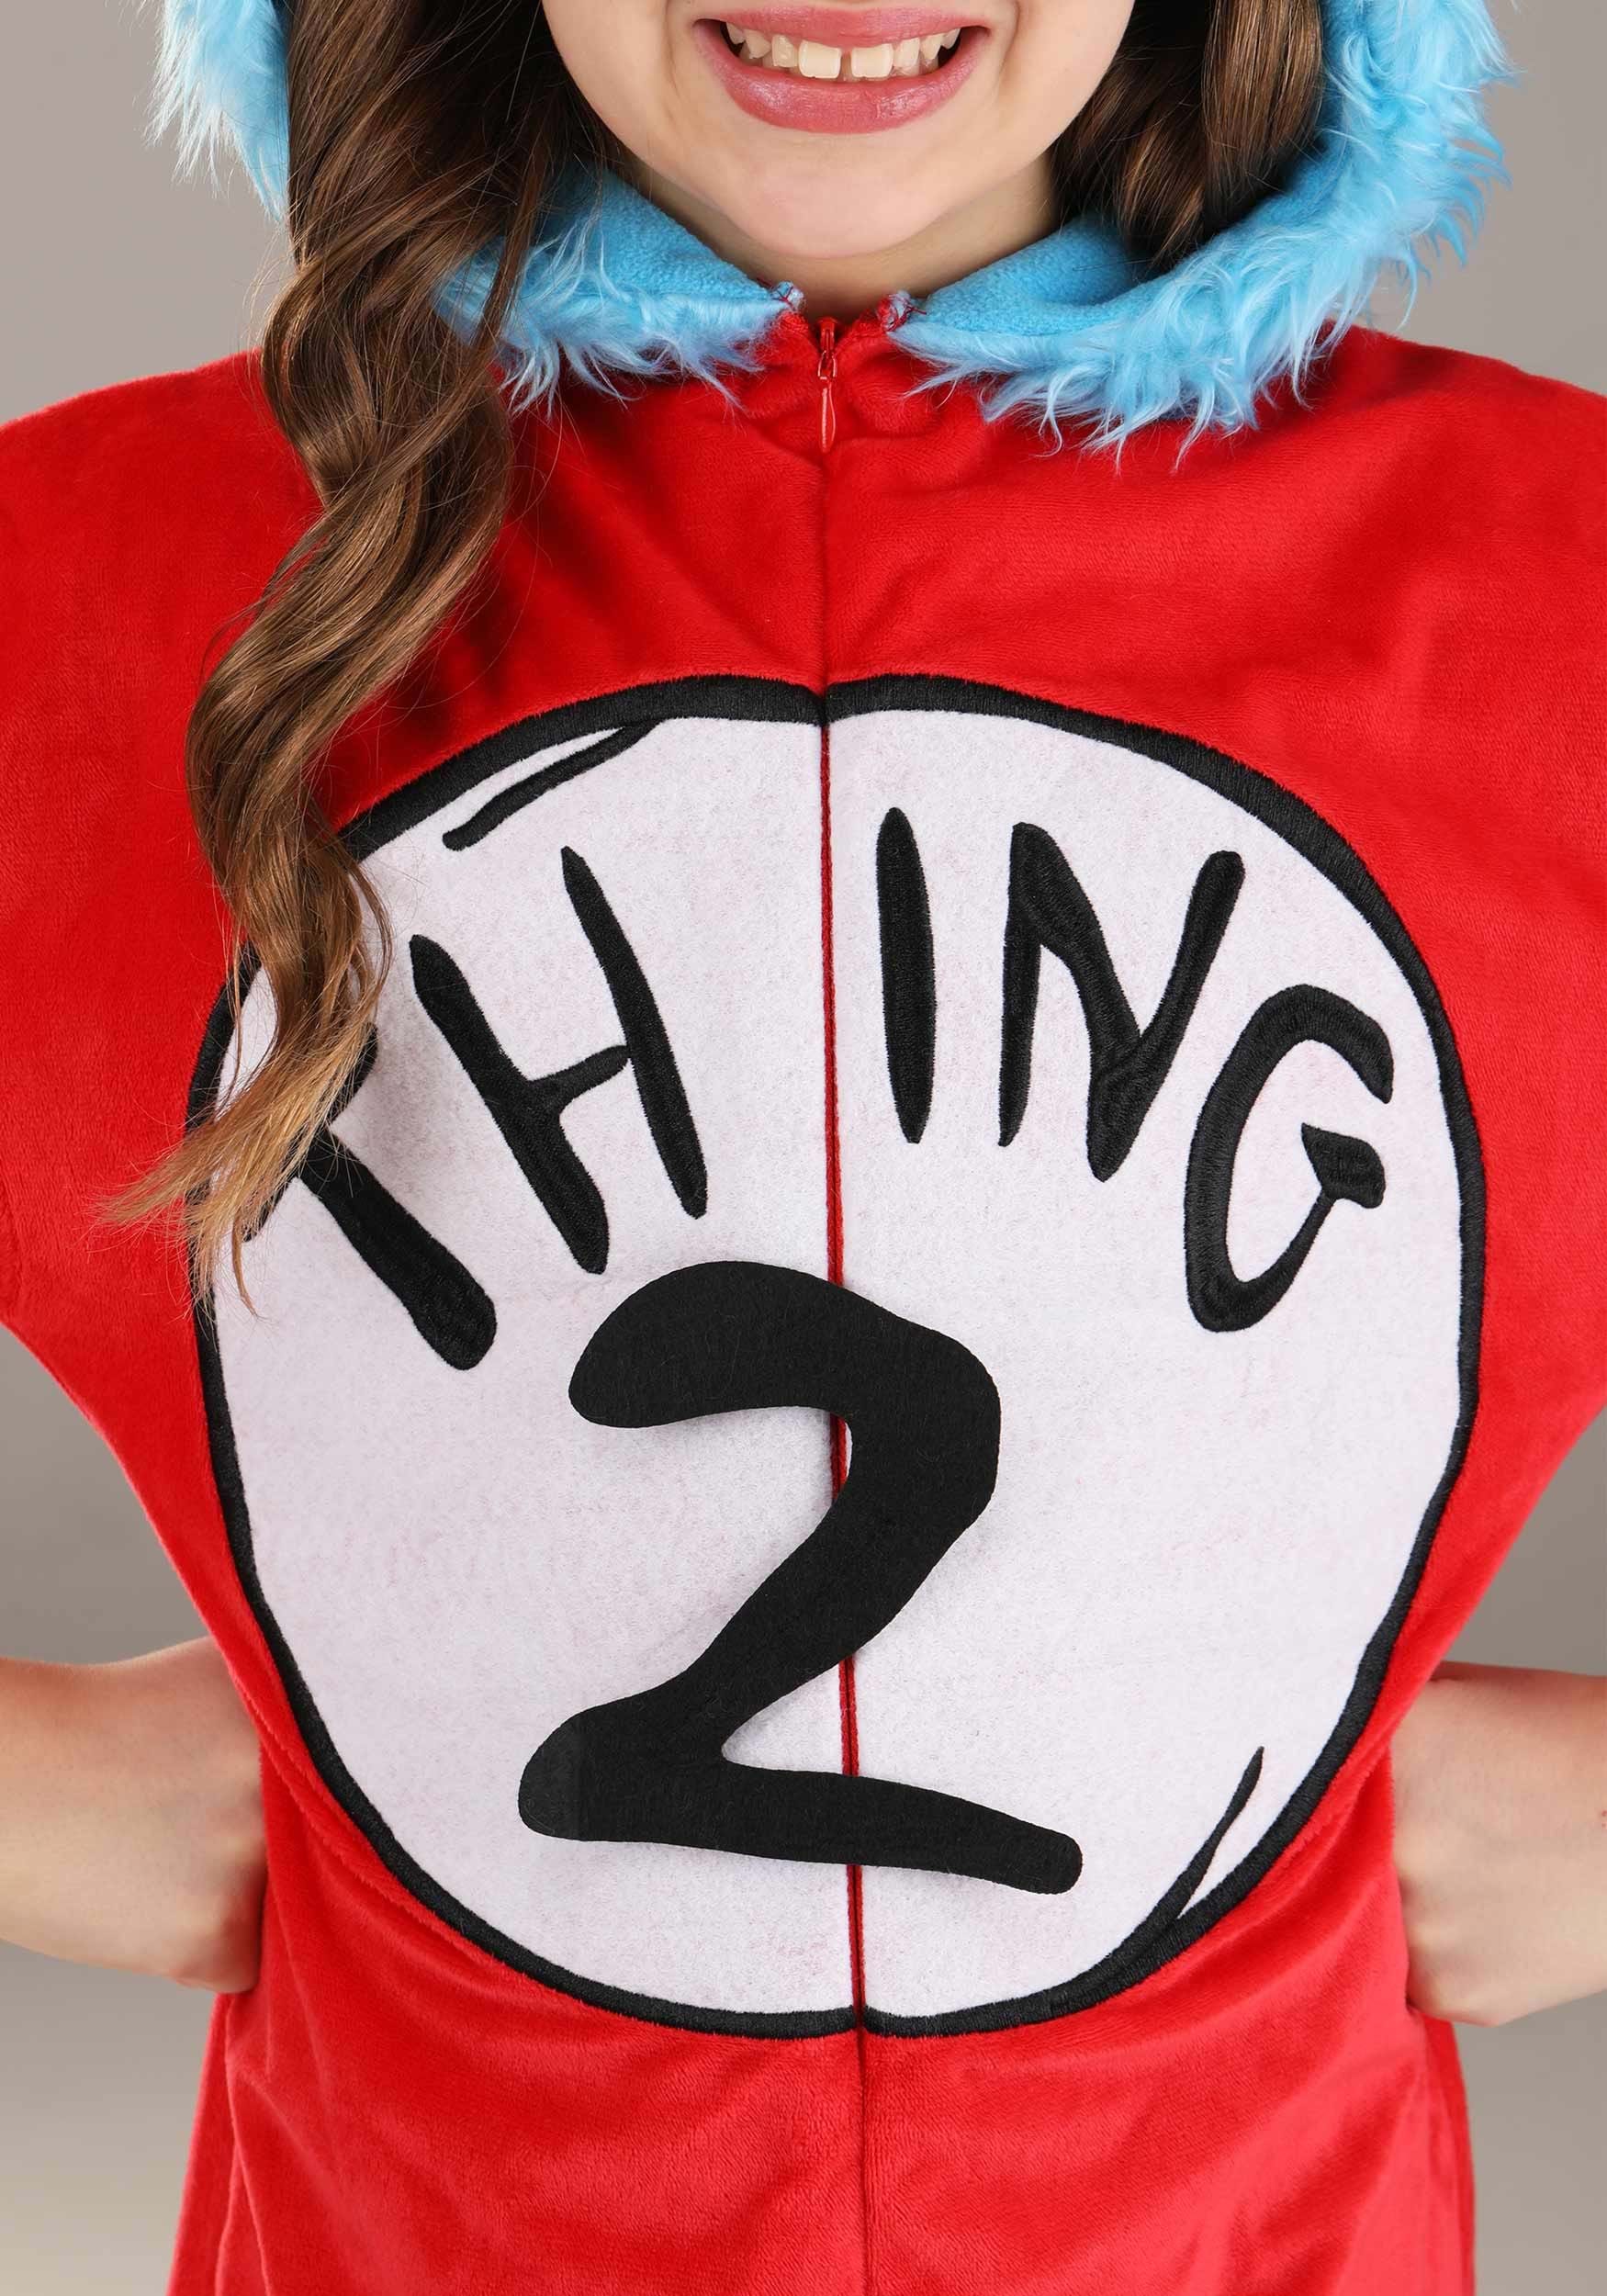 Thing 1 And 2 Jumpsuit Kids Costume